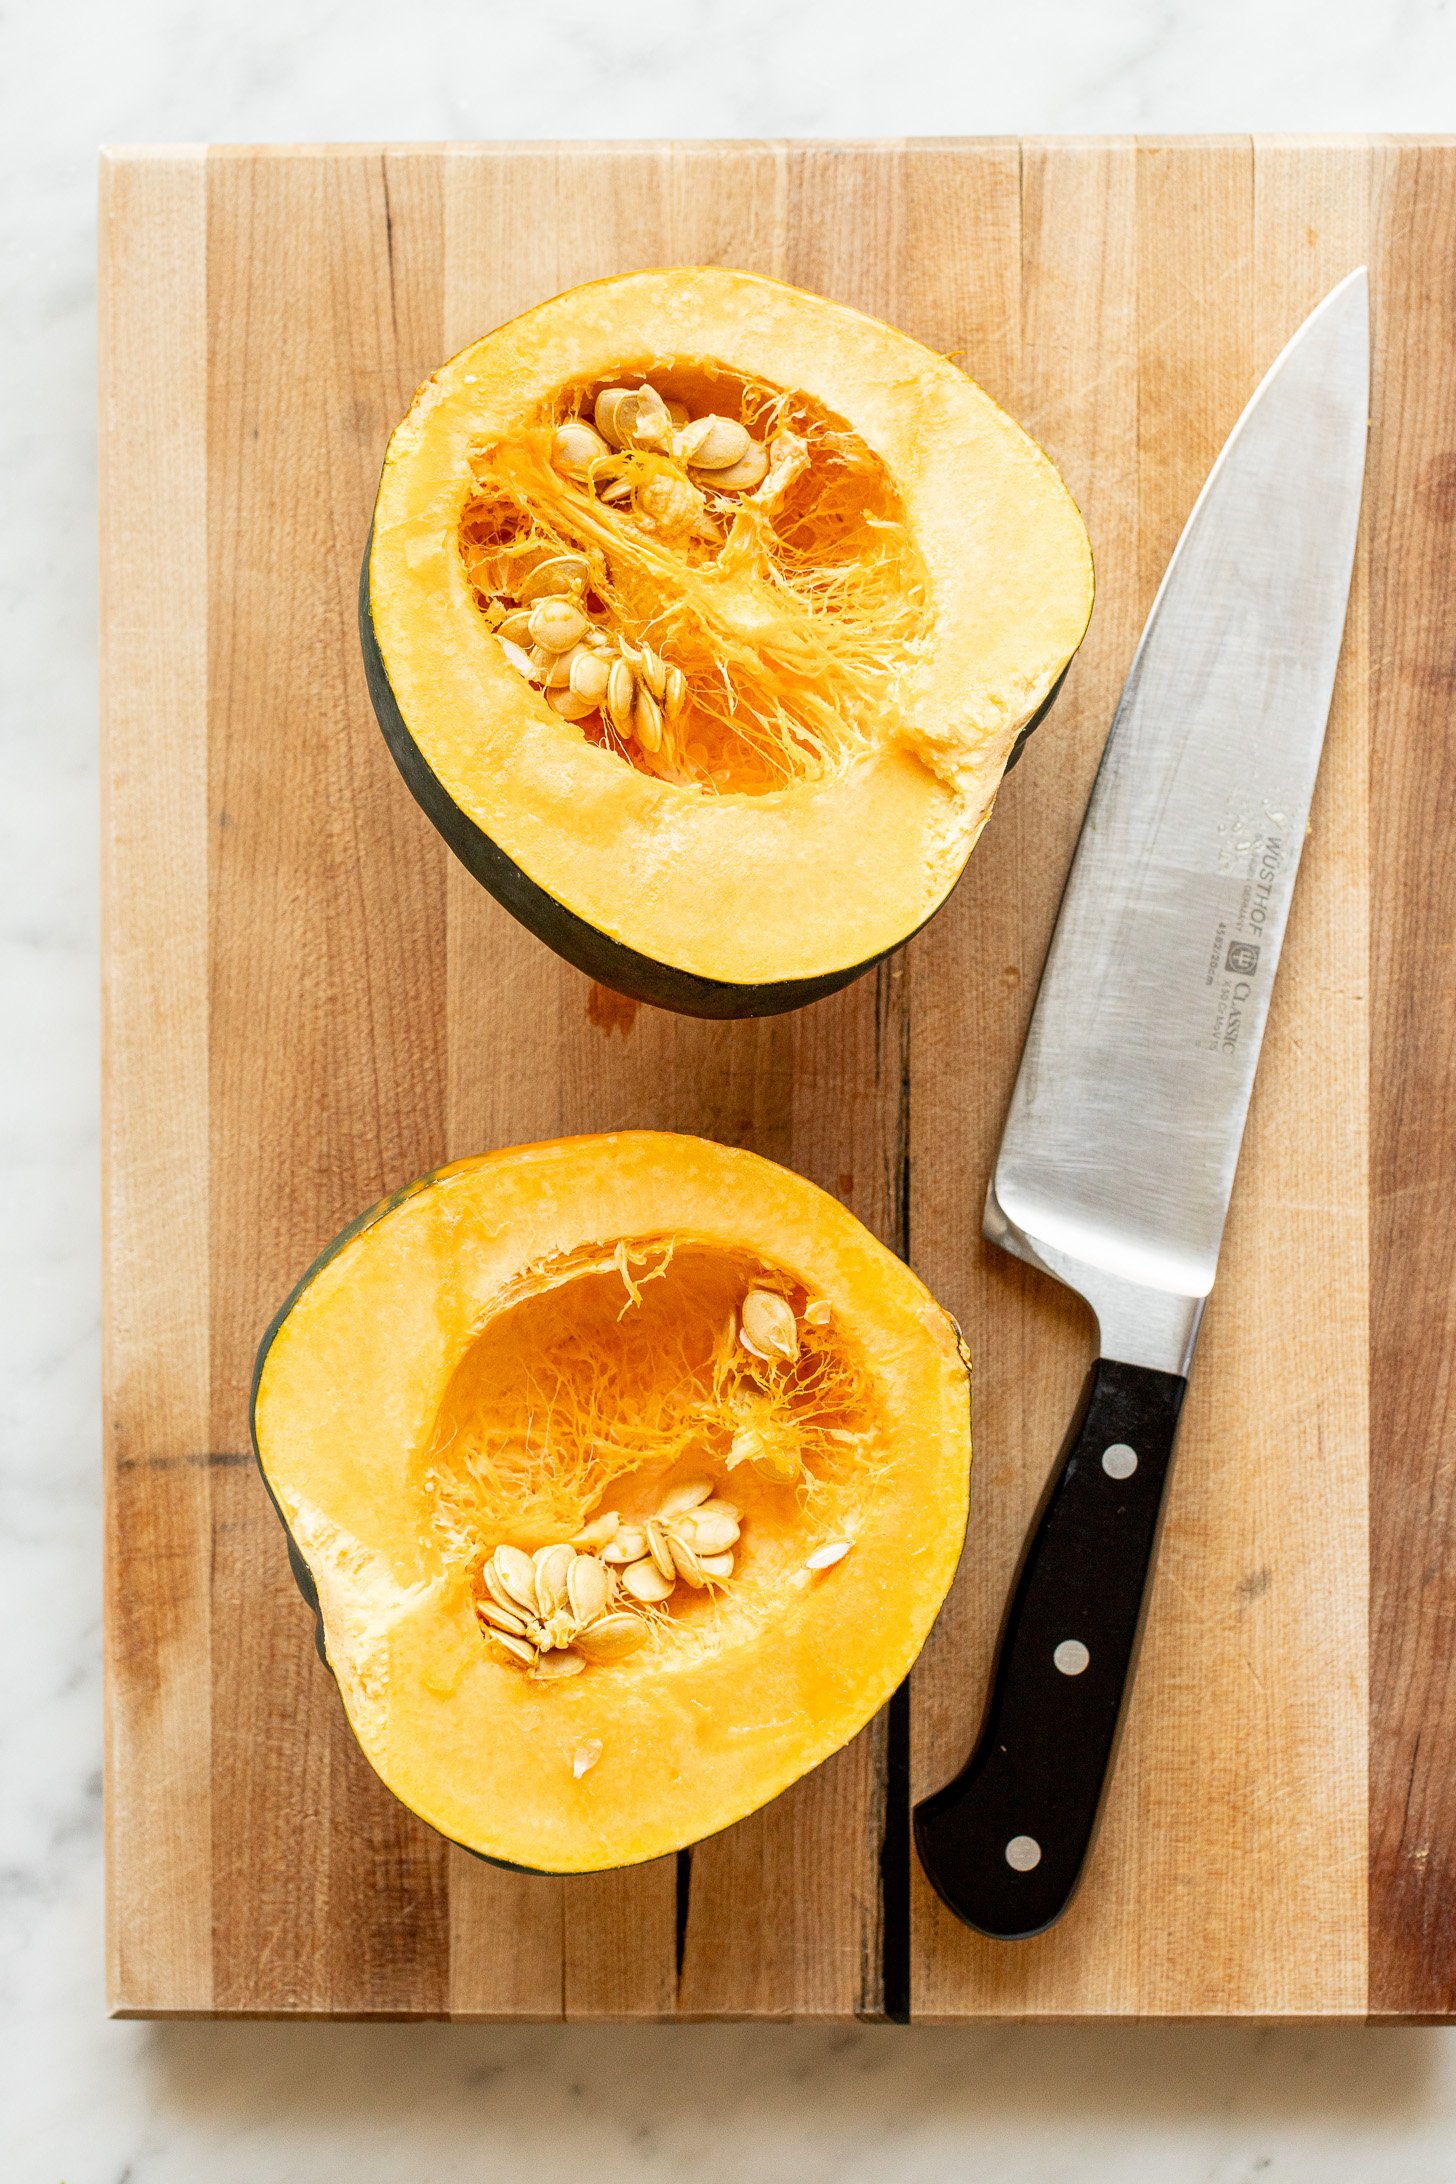 Two halves of an acorn squash along with a chef's knife sitting on a wooden cutting board.